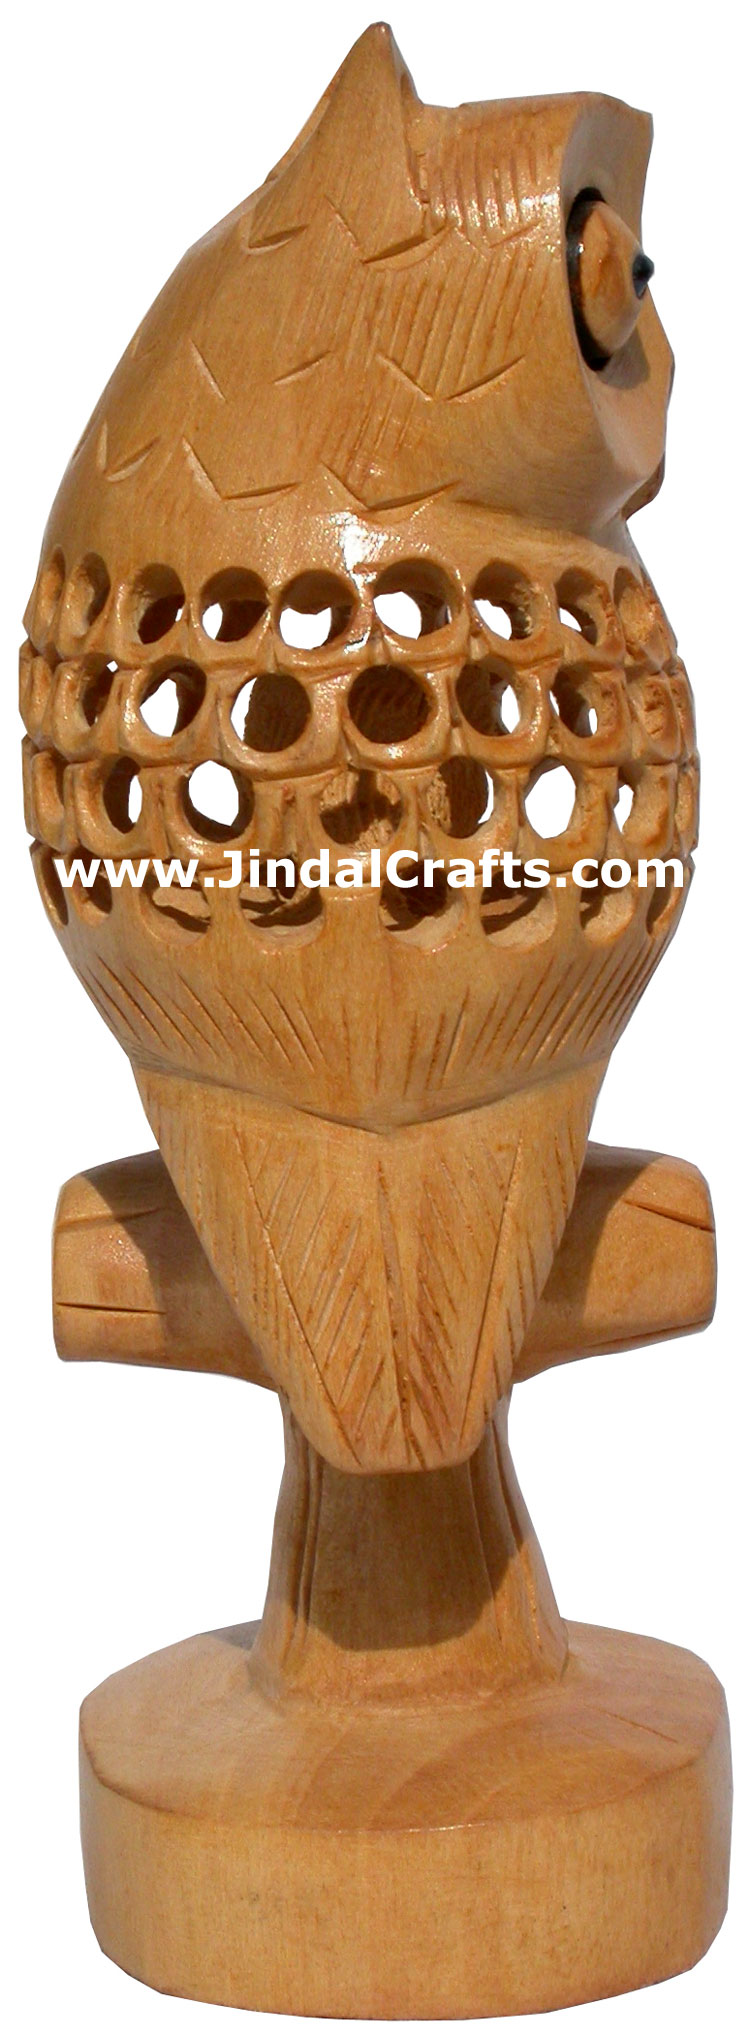 Hand Carved Wooden Lucky Owl India Artifact Decoration Figurine Sculpture Idols